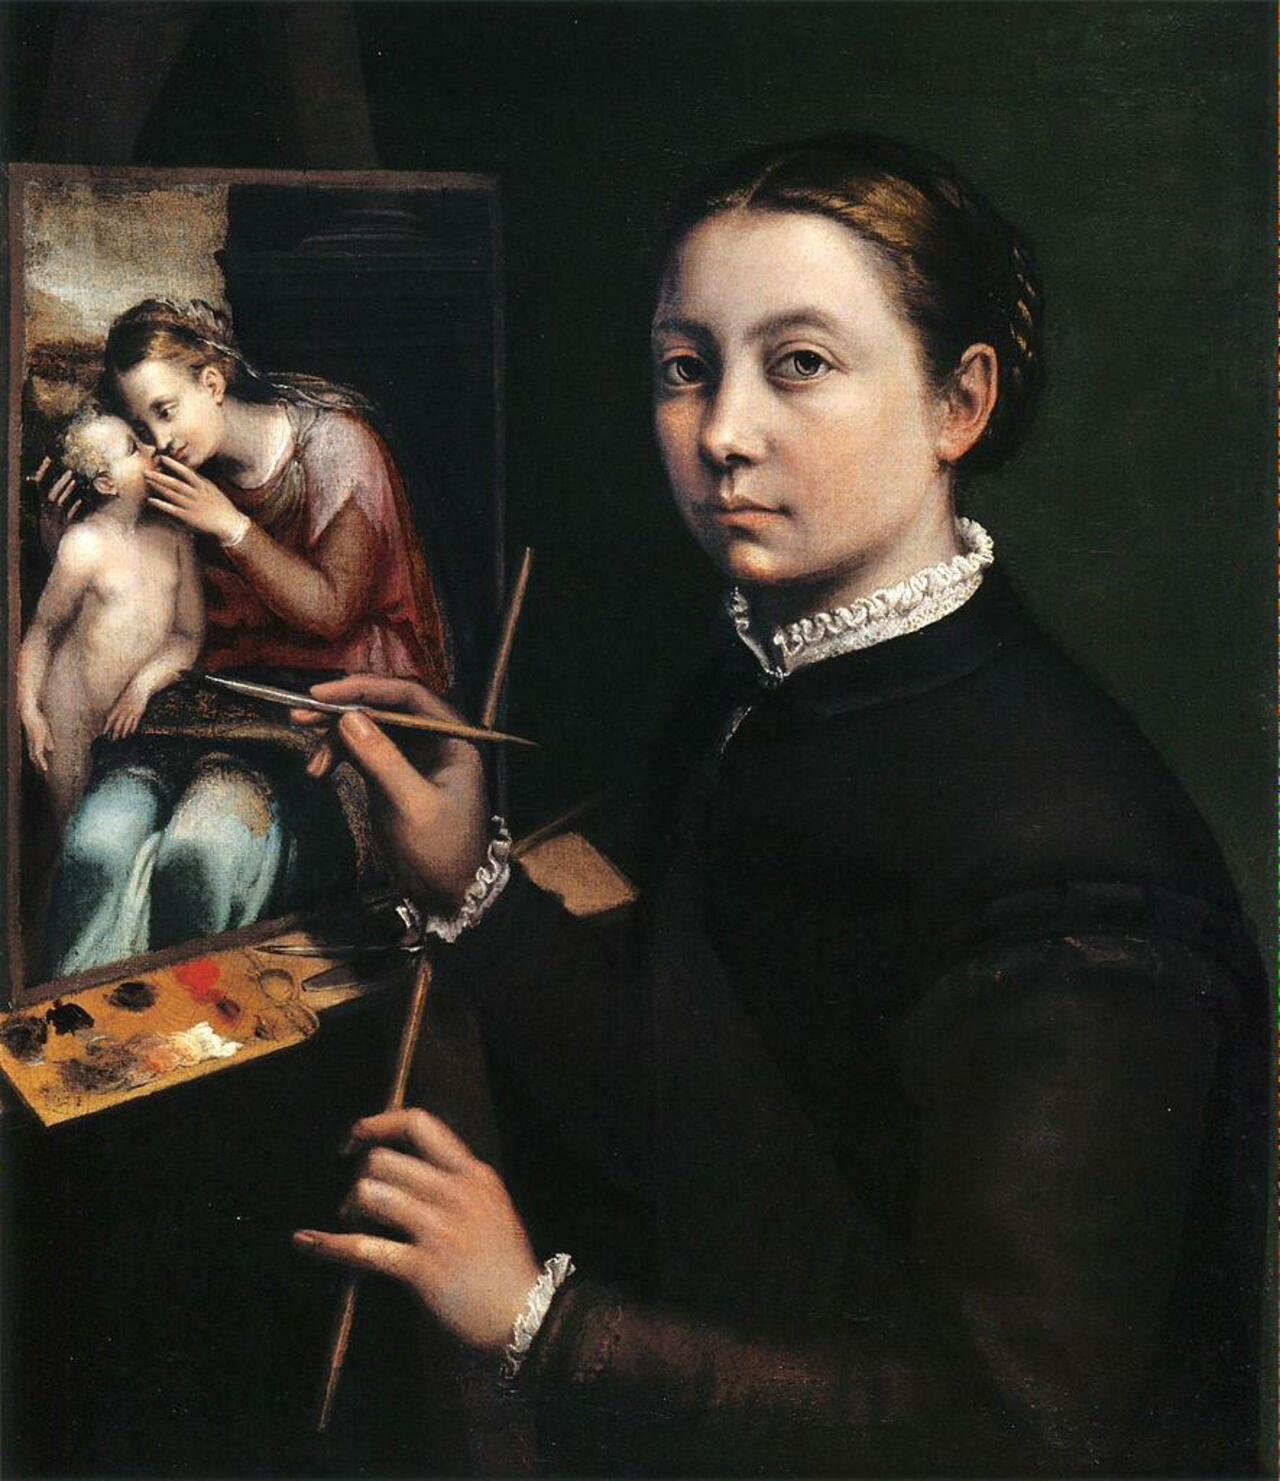 'Self-Portrait at the Easel'
Sofonisba Anguissola, 1556 #art http://t.co/C3wO7dDg4H